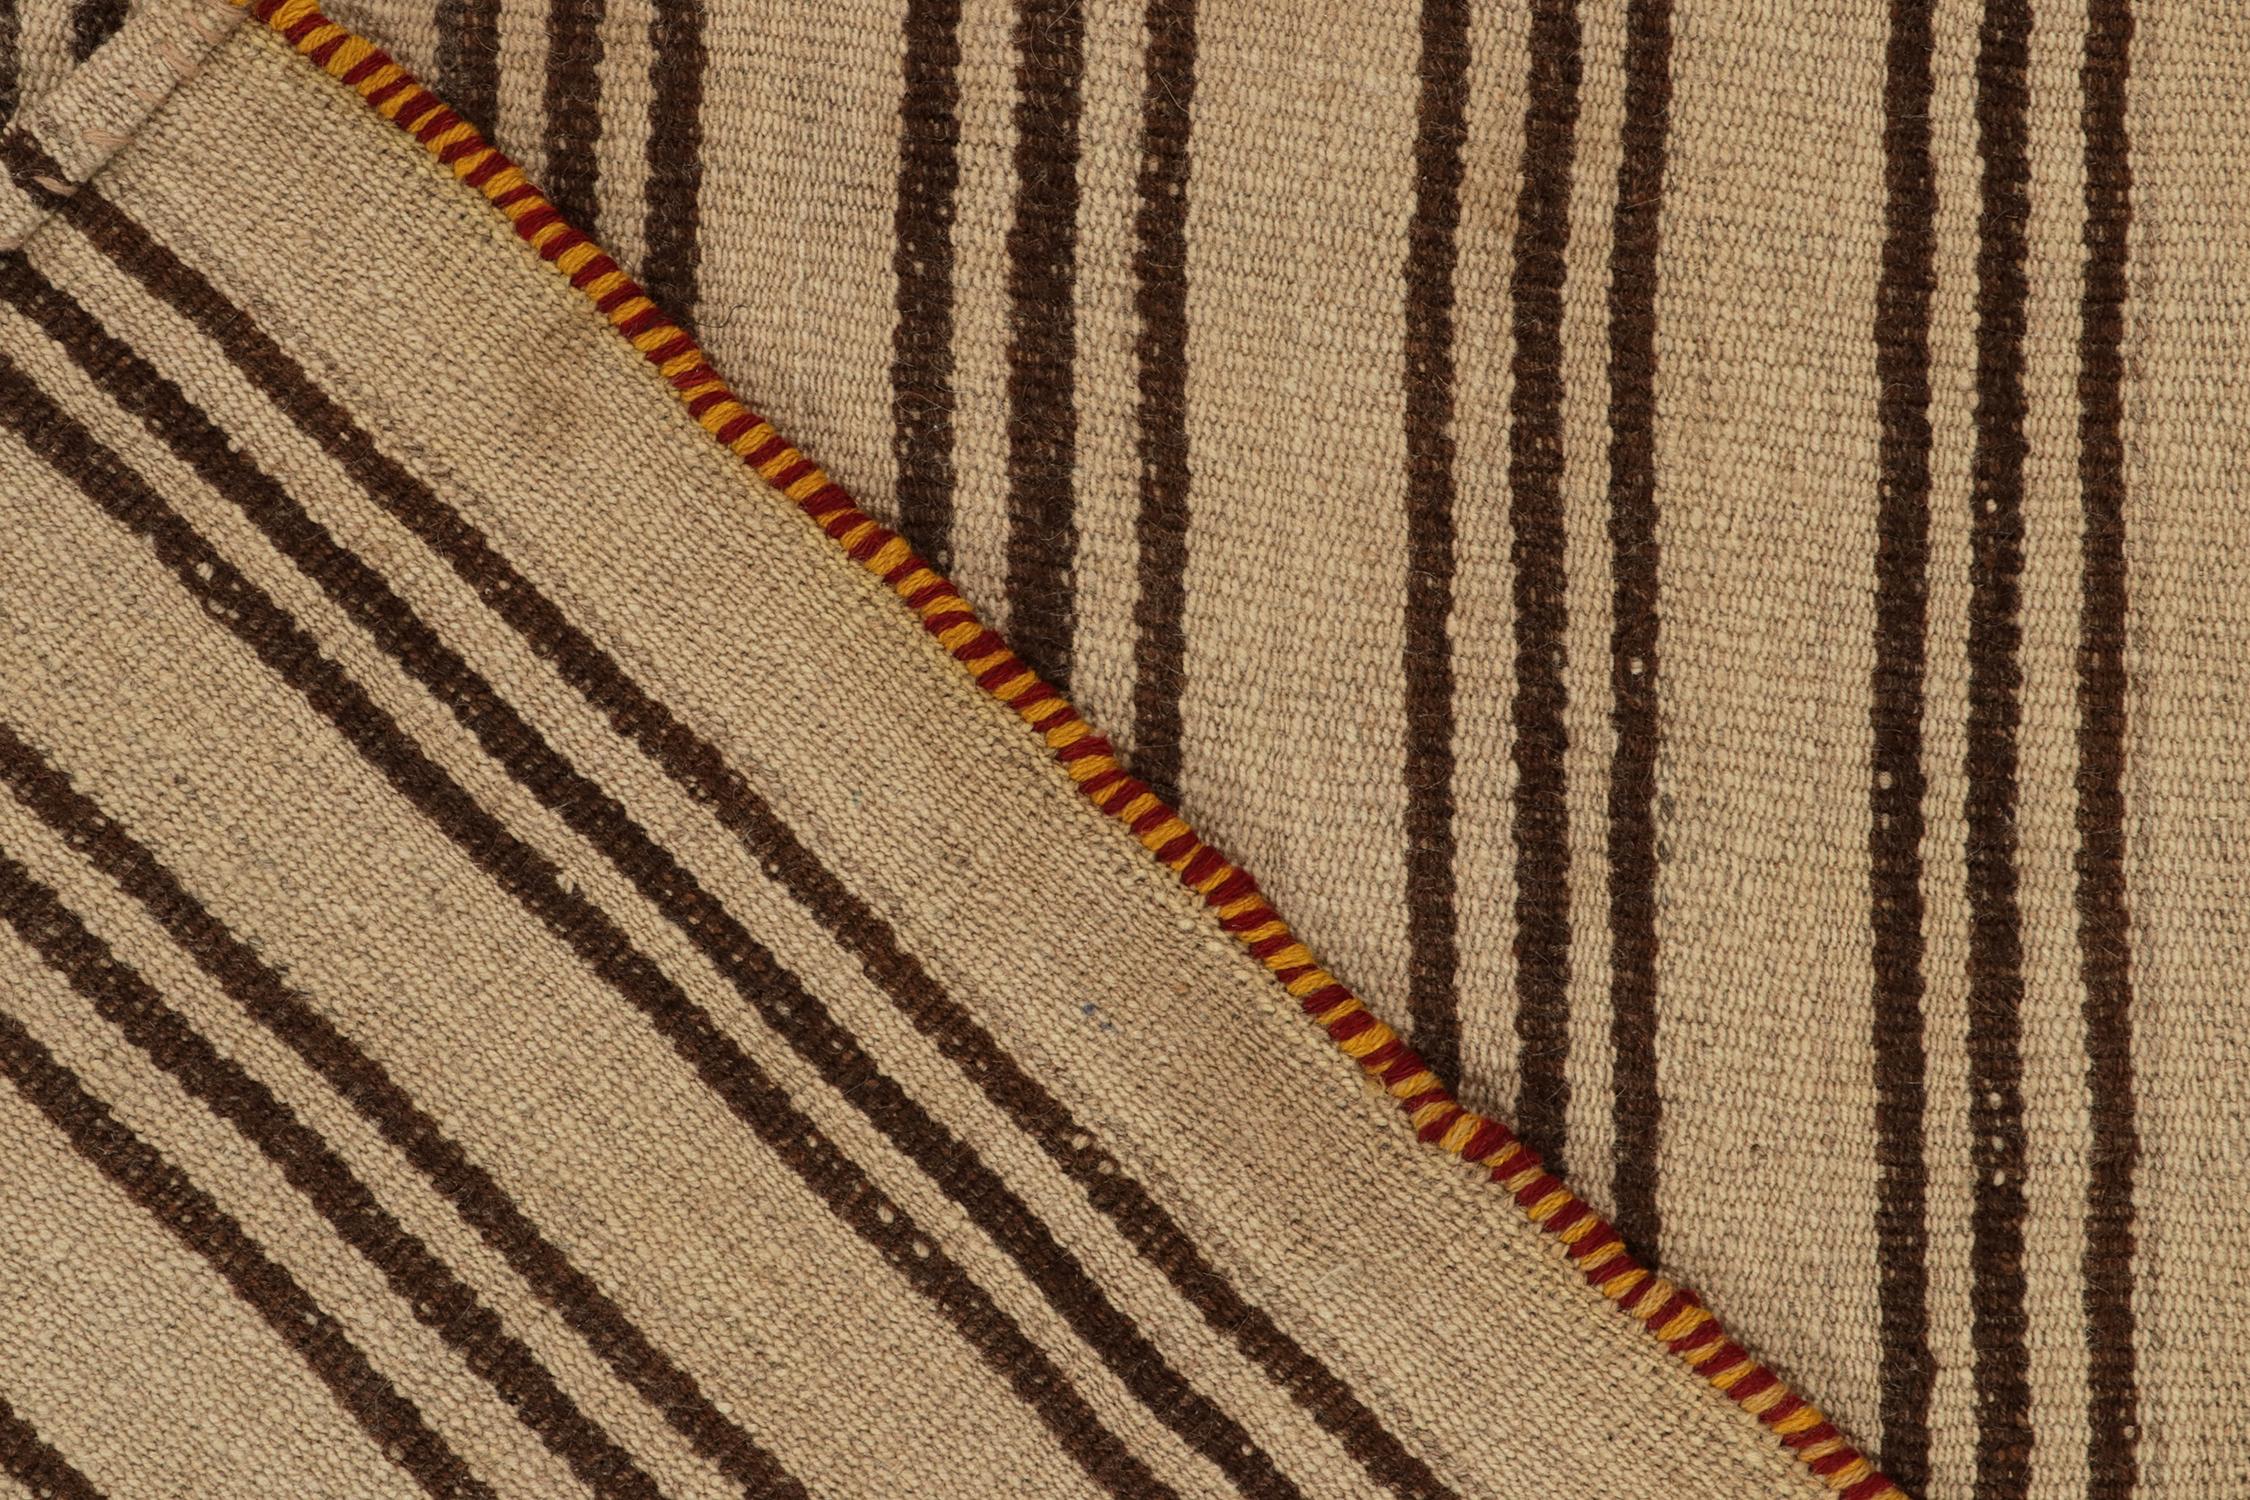 Mid-20th Century Vintage Kilim rug with Beige-Brown Stripe Patterns, Panel-Woven by Rug & Kilim For Sale